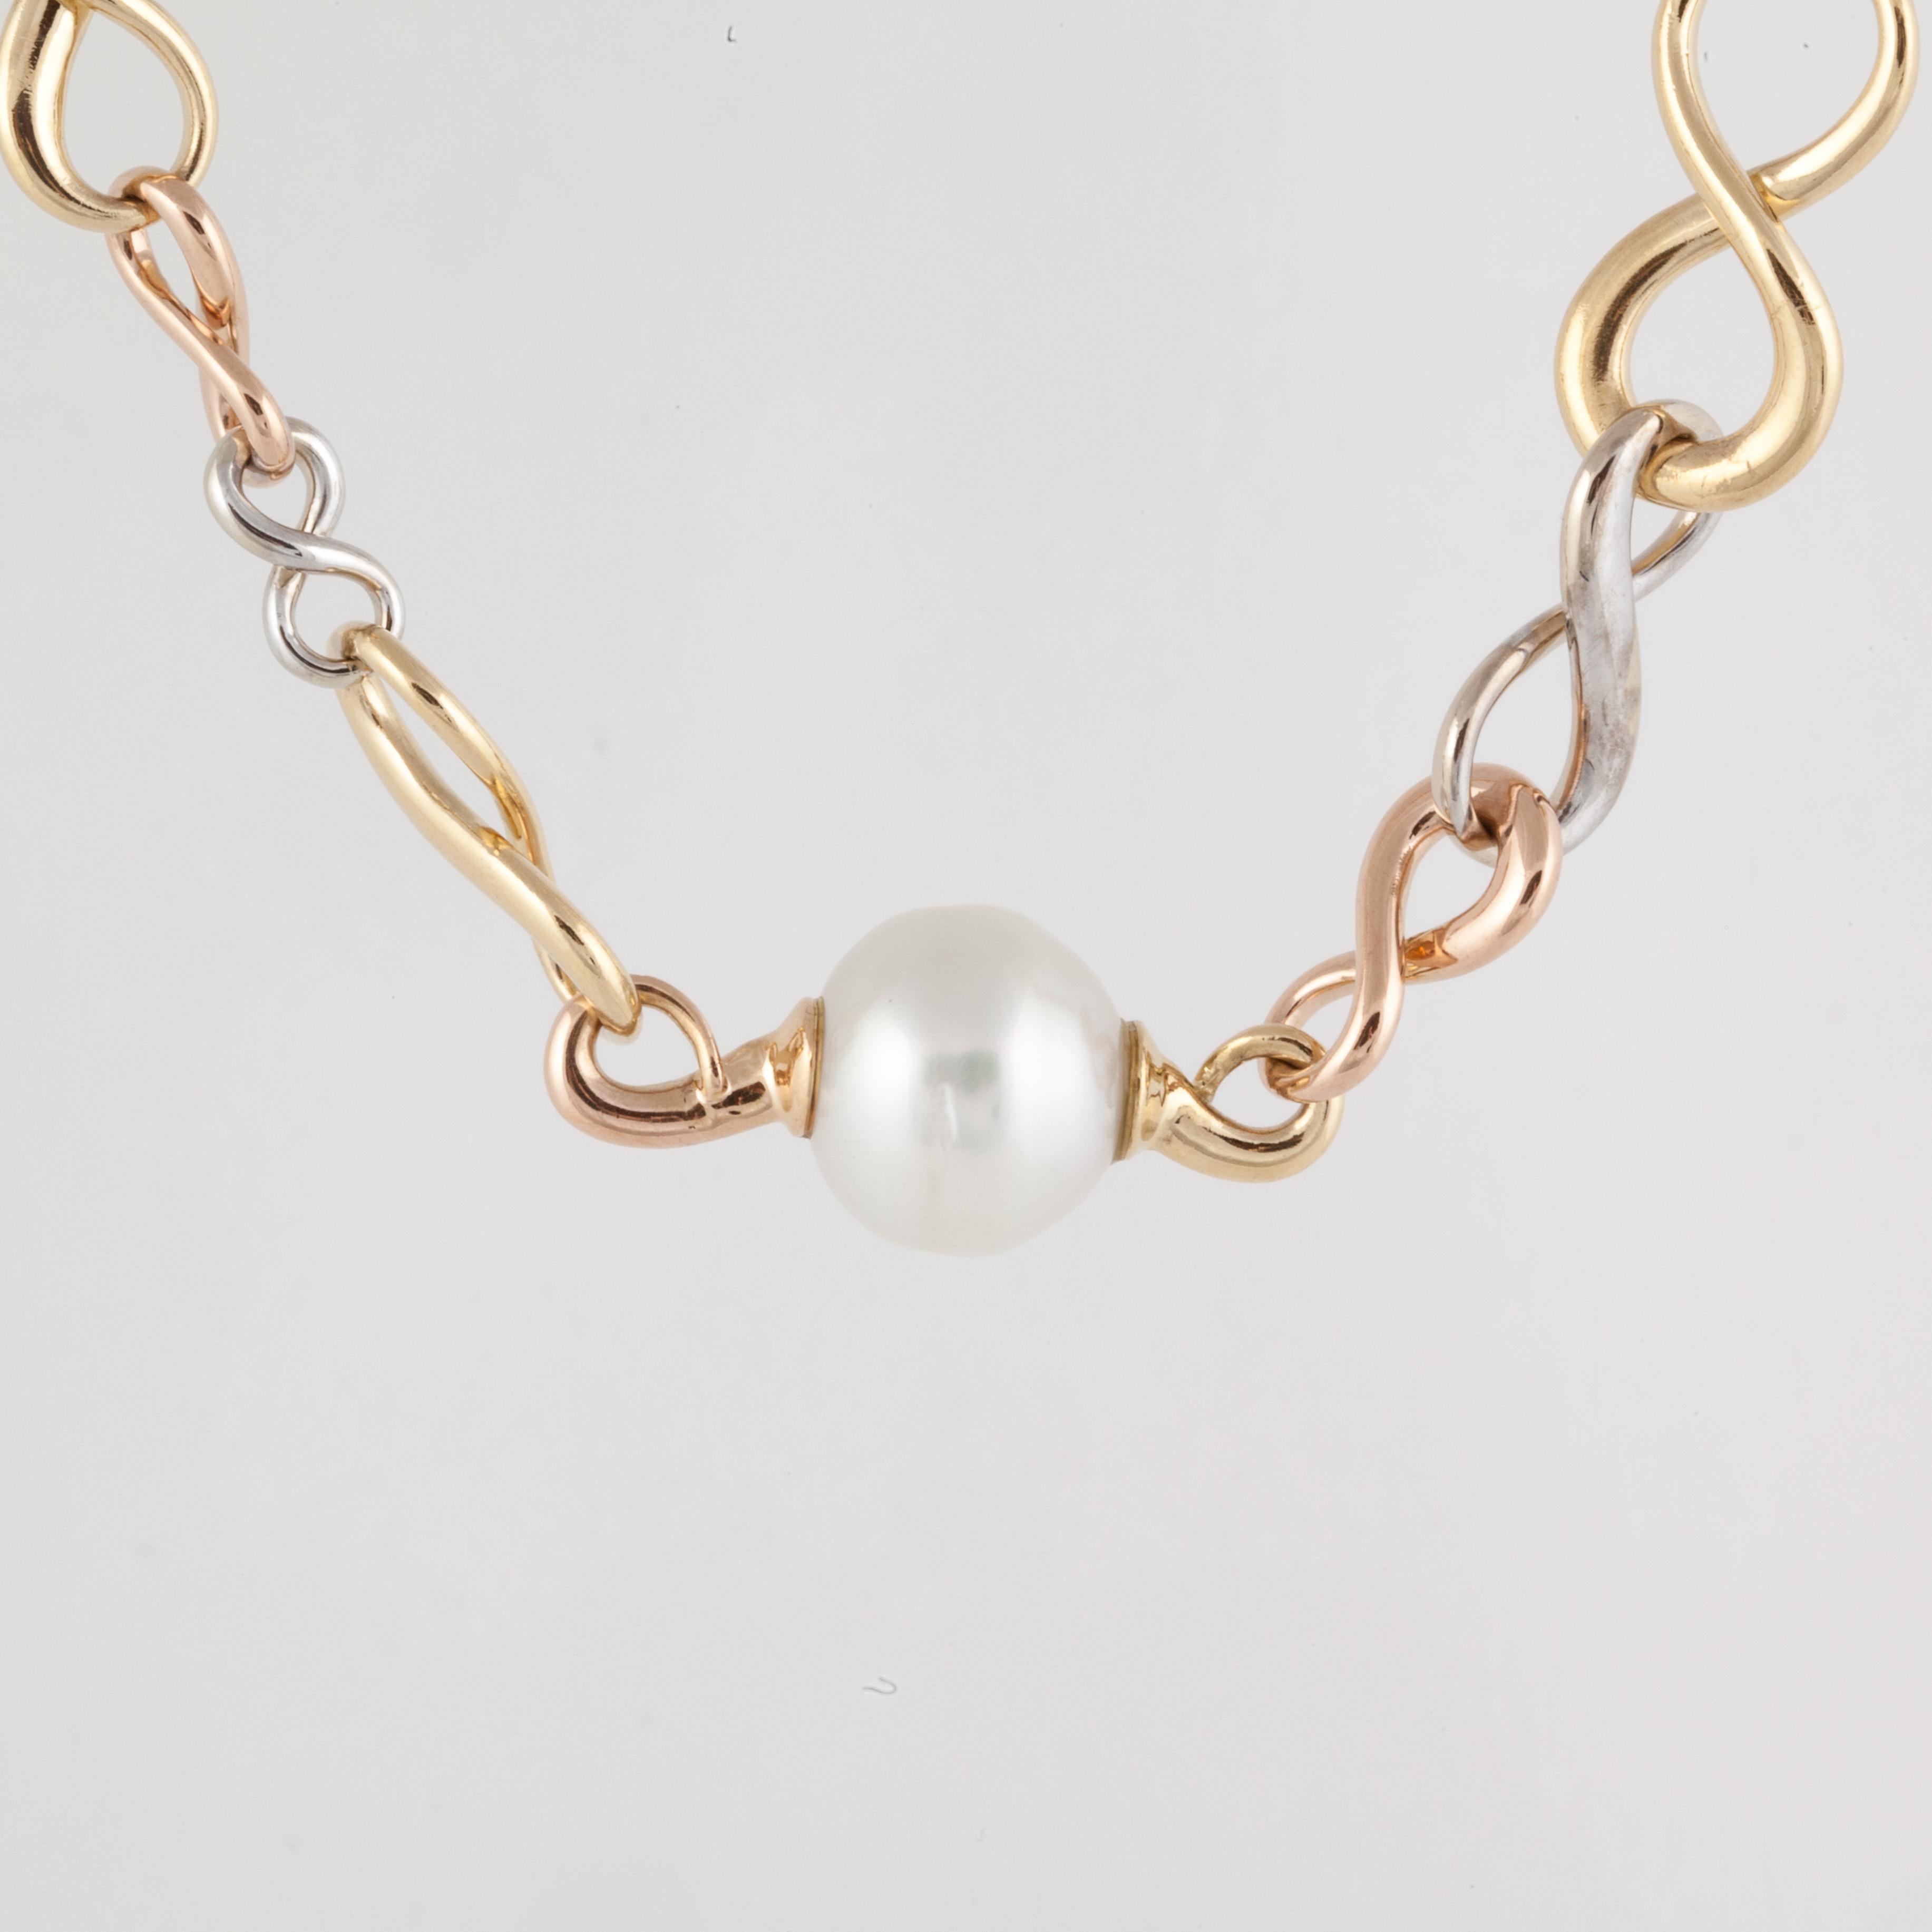 18K trim-color gold figure eight link necklace with three cultured pearls.  The pearls measure 13-14mm.  The necklace is 16 1/4 inches long and 1/2 inch wide.  